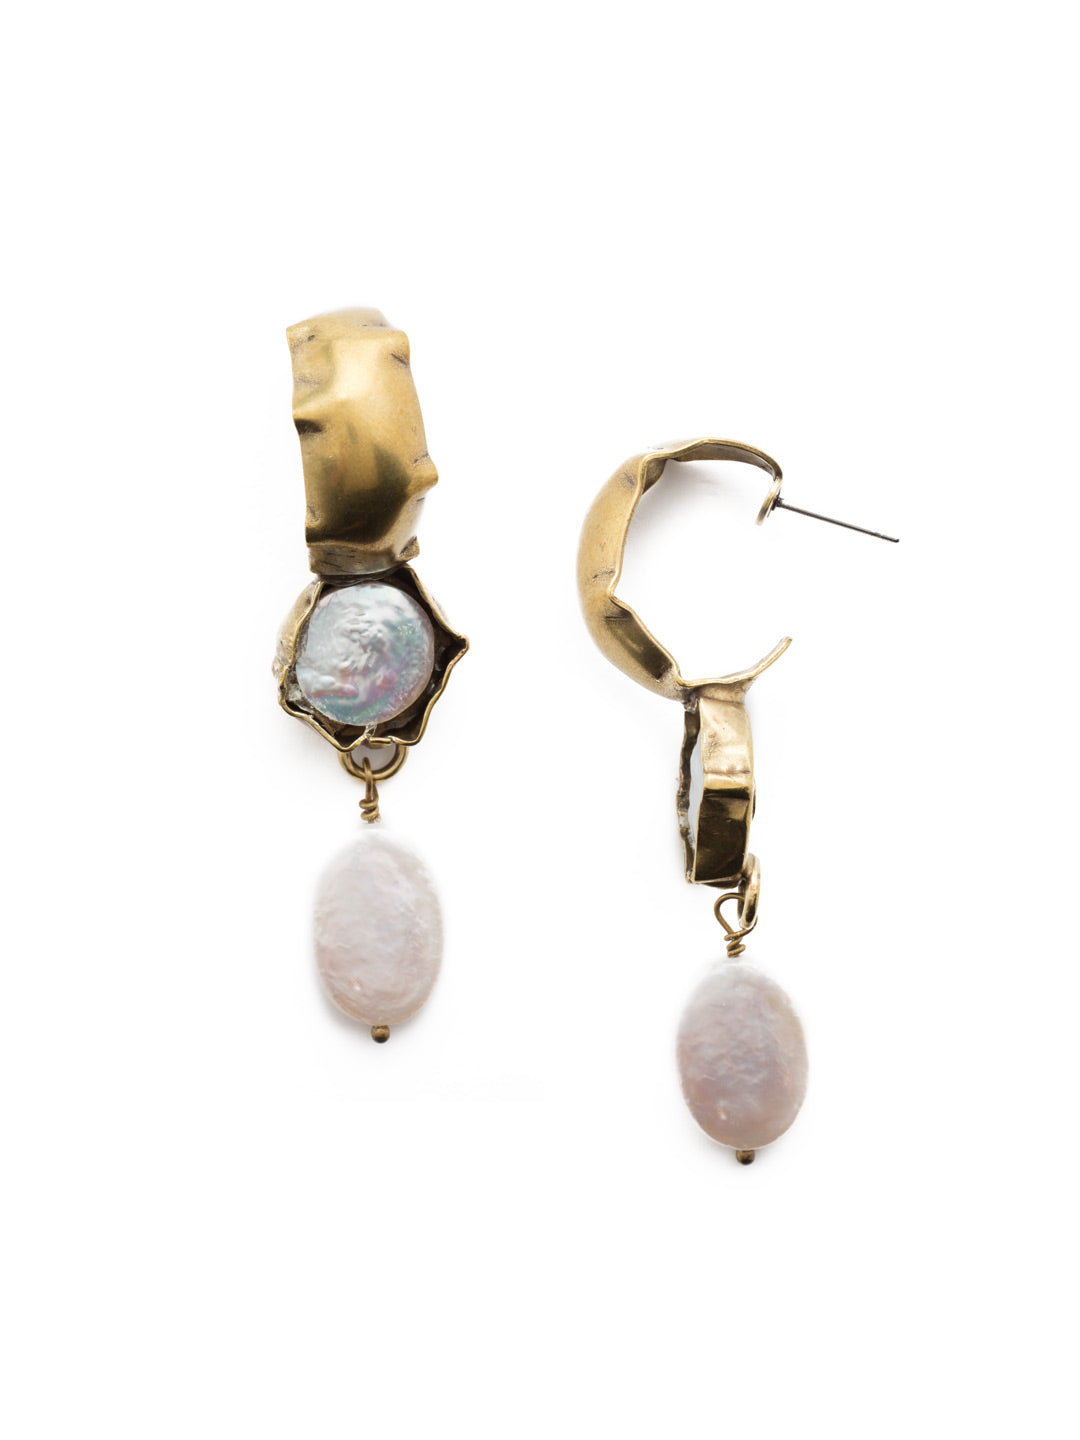 Tulsa Hoop Earrings - 4EEU12AGMDP - <p>Put on our Tulsa Hoop Earrings for a touch of hammered metal paired with pretty freshwater pearls. They're as unique as you are. From Sorrelli's Modern Pearl collection in our Antique Gold-tone finish.</p>